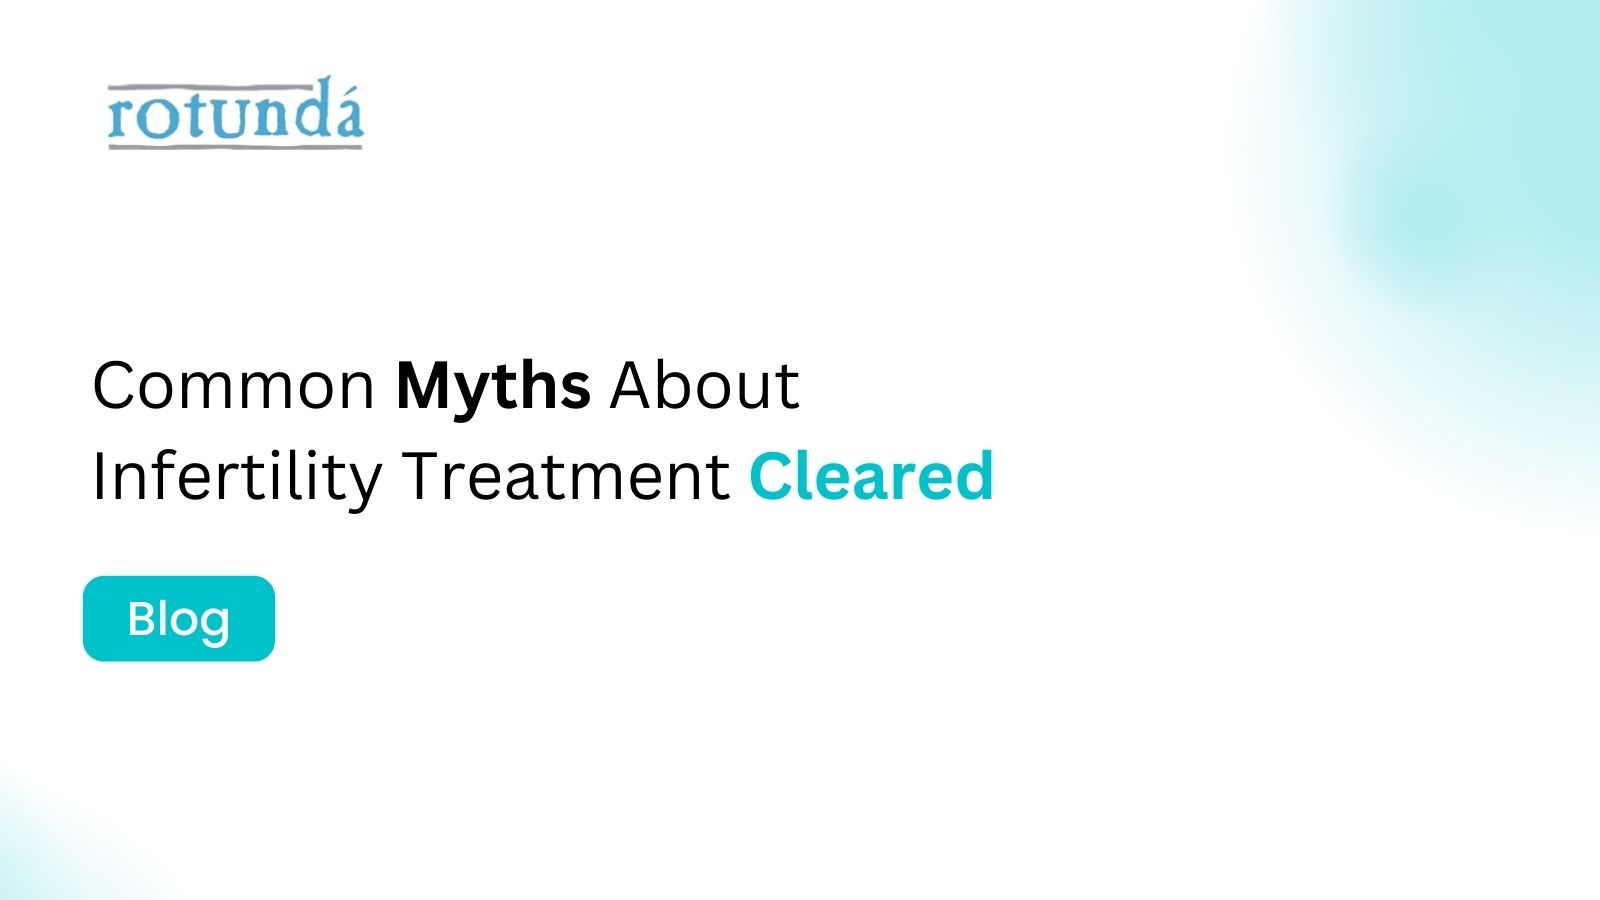 Common Myths About Infertility Treatment Cleared